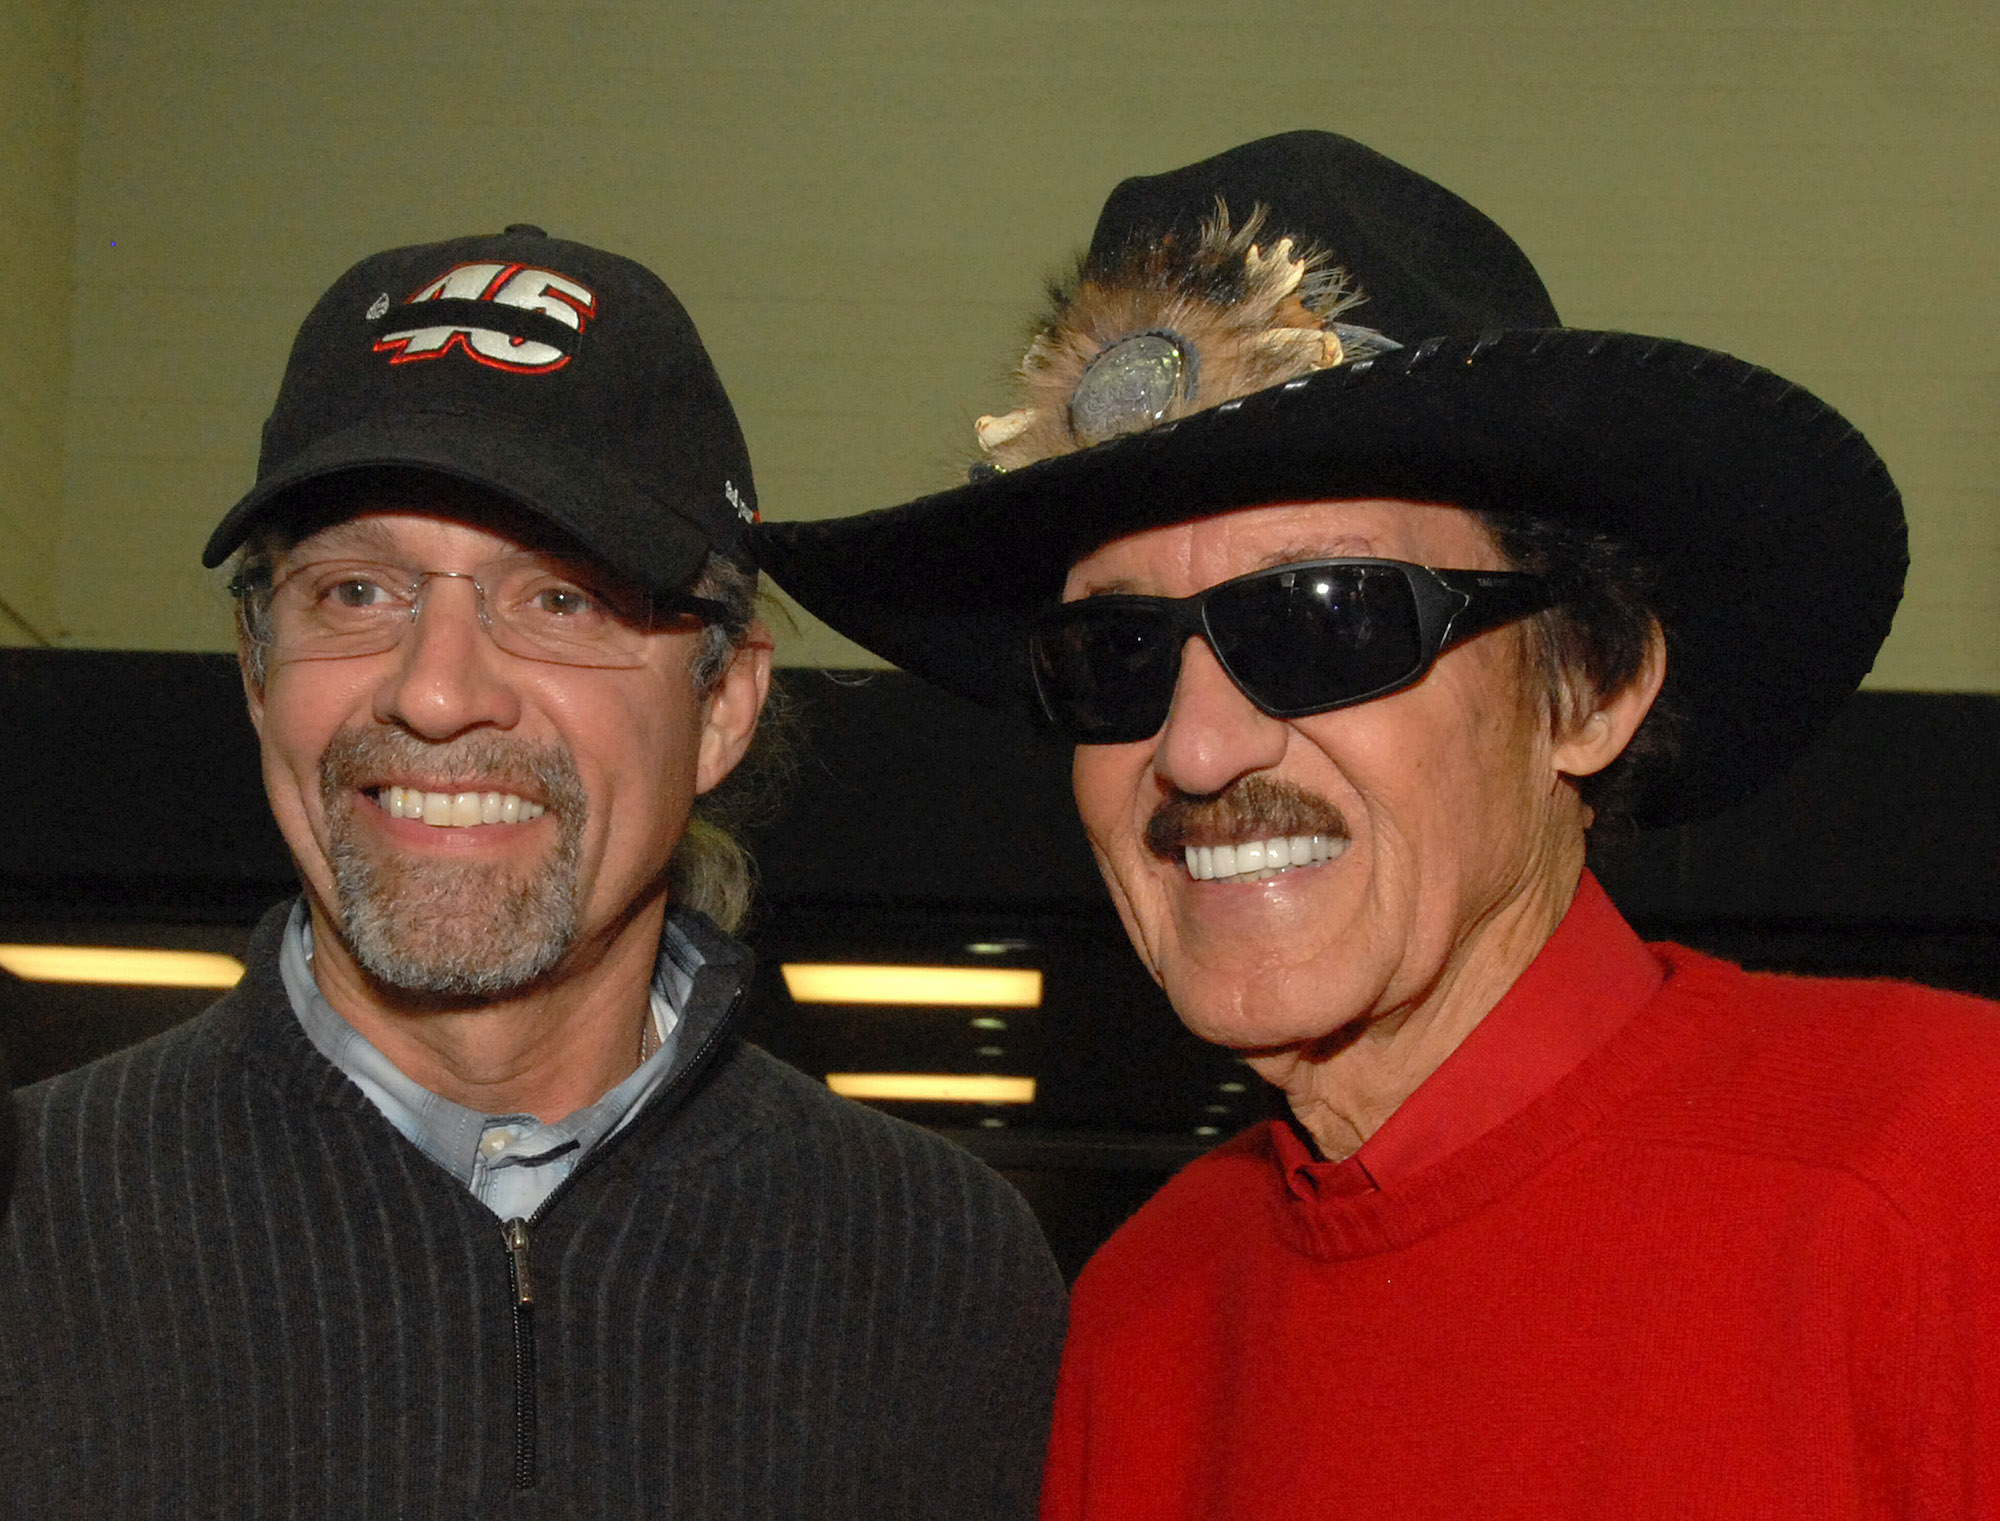 Kyle Petty and Richard Petty pose for photo